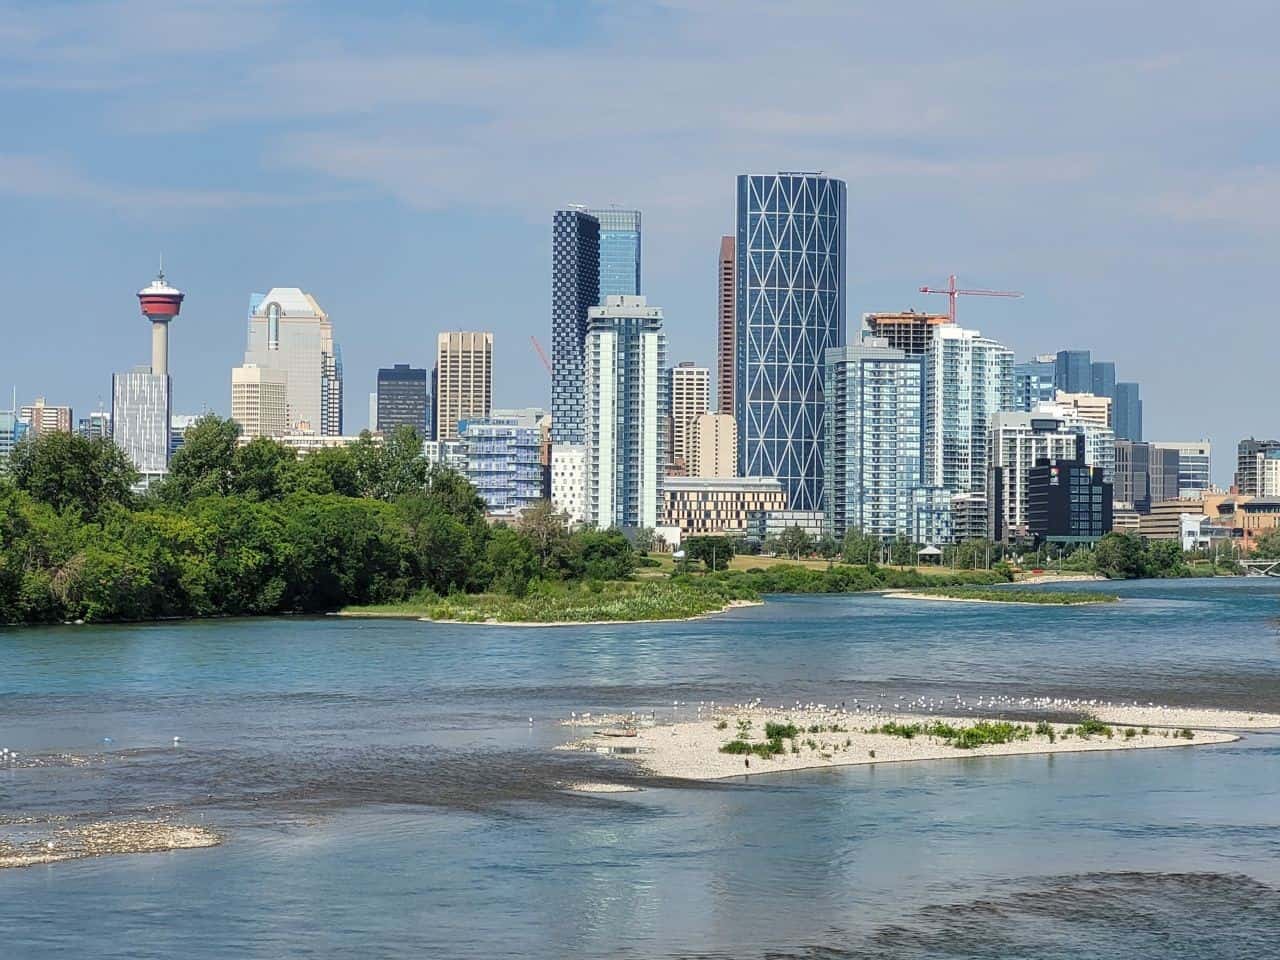 The urban pathways of Calgary Alberta, which are part of the 28,000 km long Trans Canada Trail, offer hikers, joggers, and cyclists beautiful views of the city's skyline.